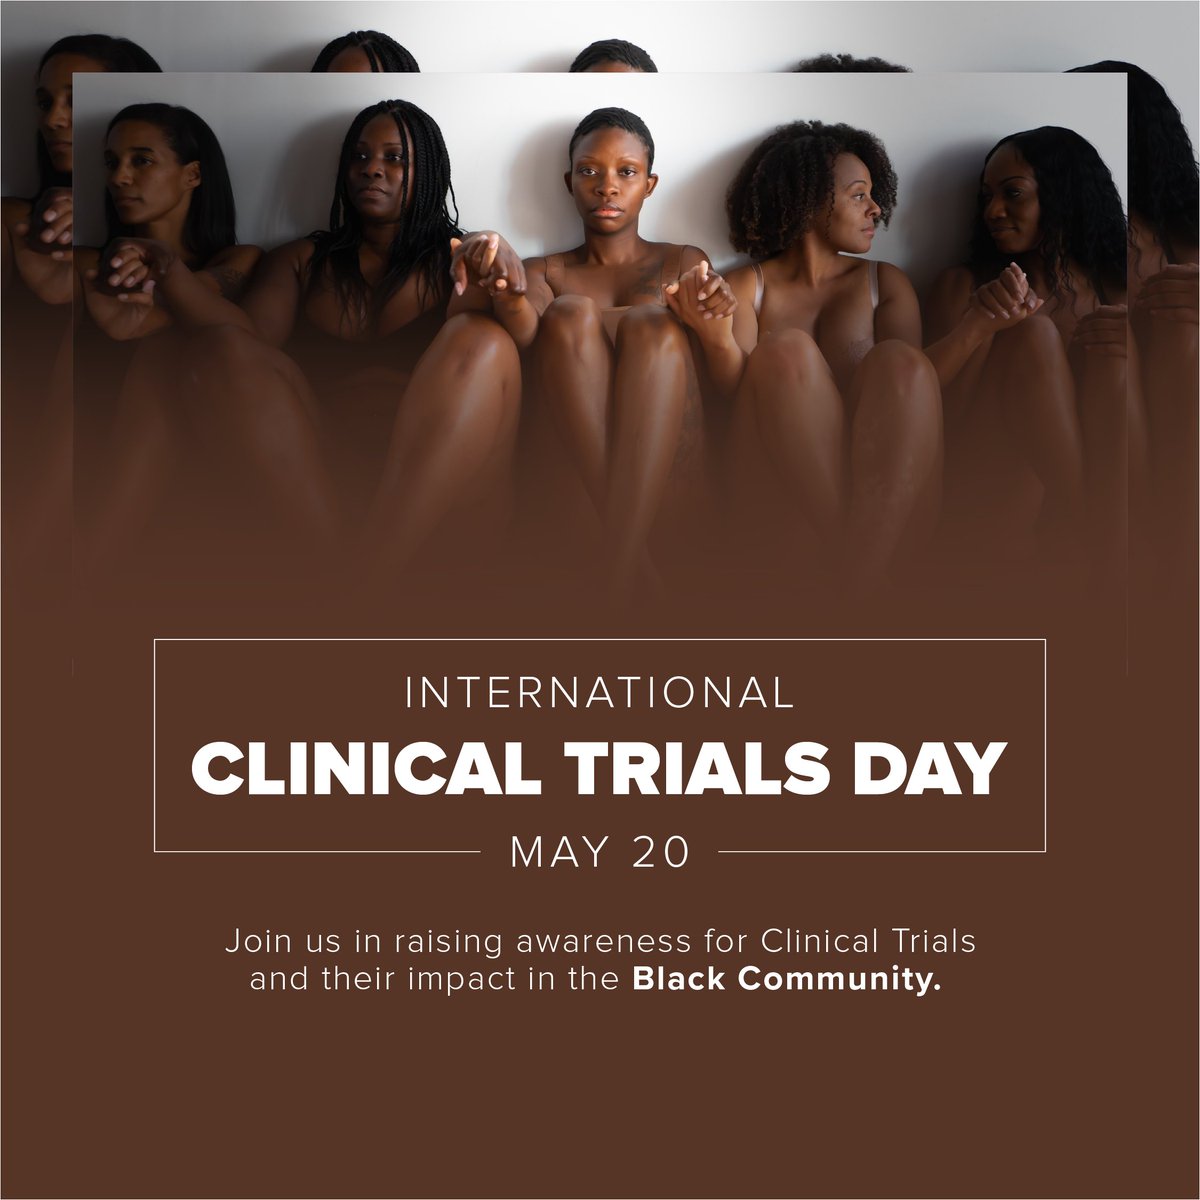 Black women’s participation in clinical trials *will* save lives. Every treatment available for breast cancer is based on past clinical trials, but Black women have historically been underrepresented. We must increase our representation for improved outcomes.